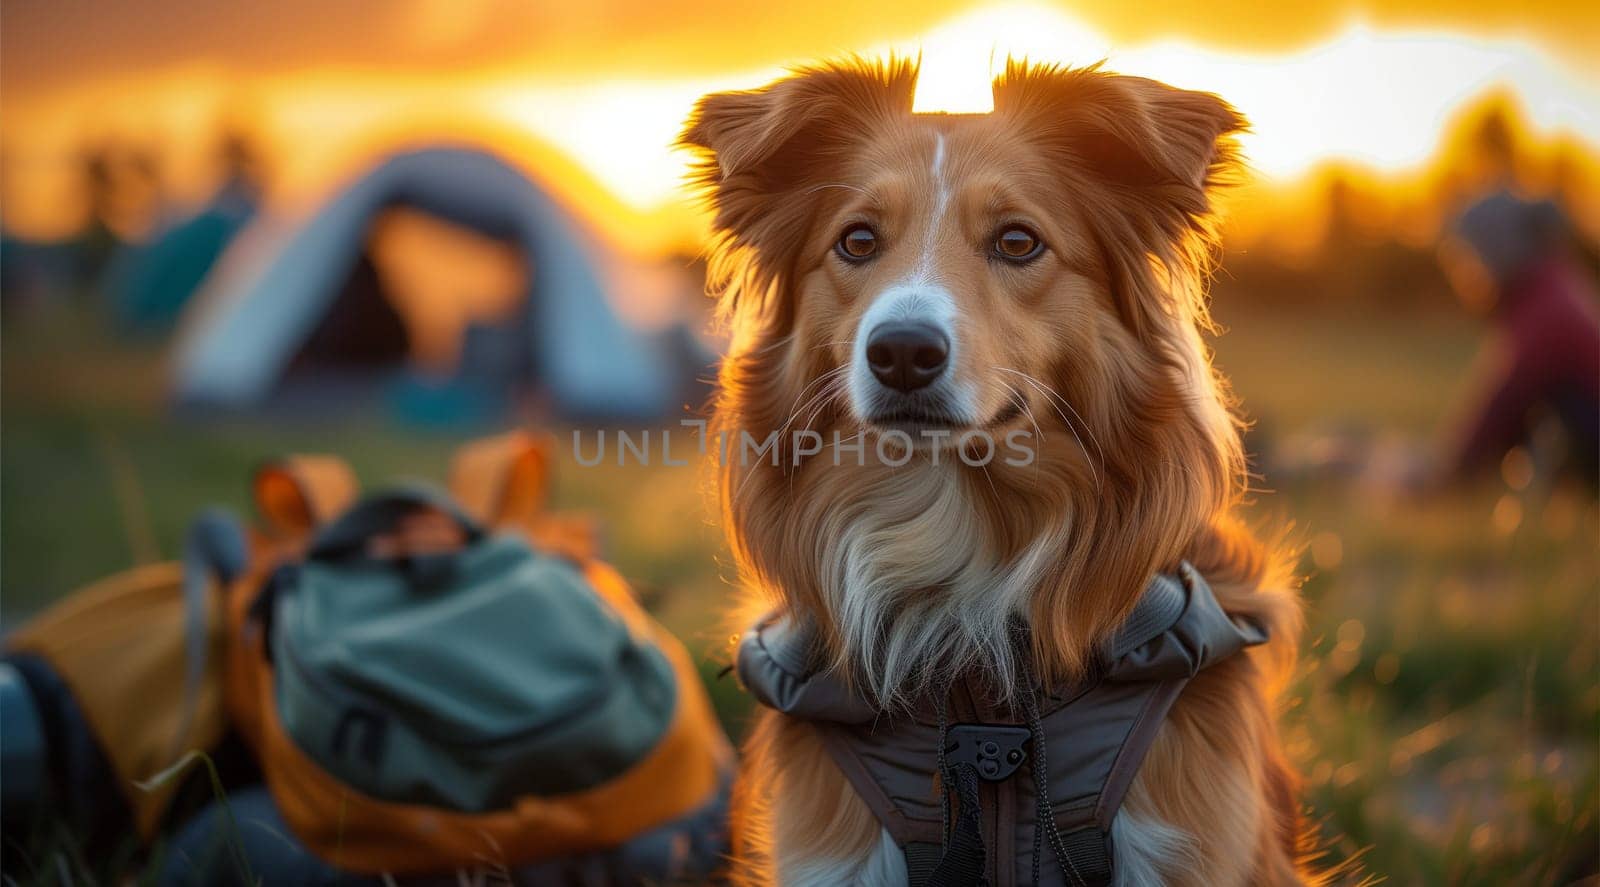 A liver and white Pointer dog is sitting happily in front of a tent at sunset by richwolf